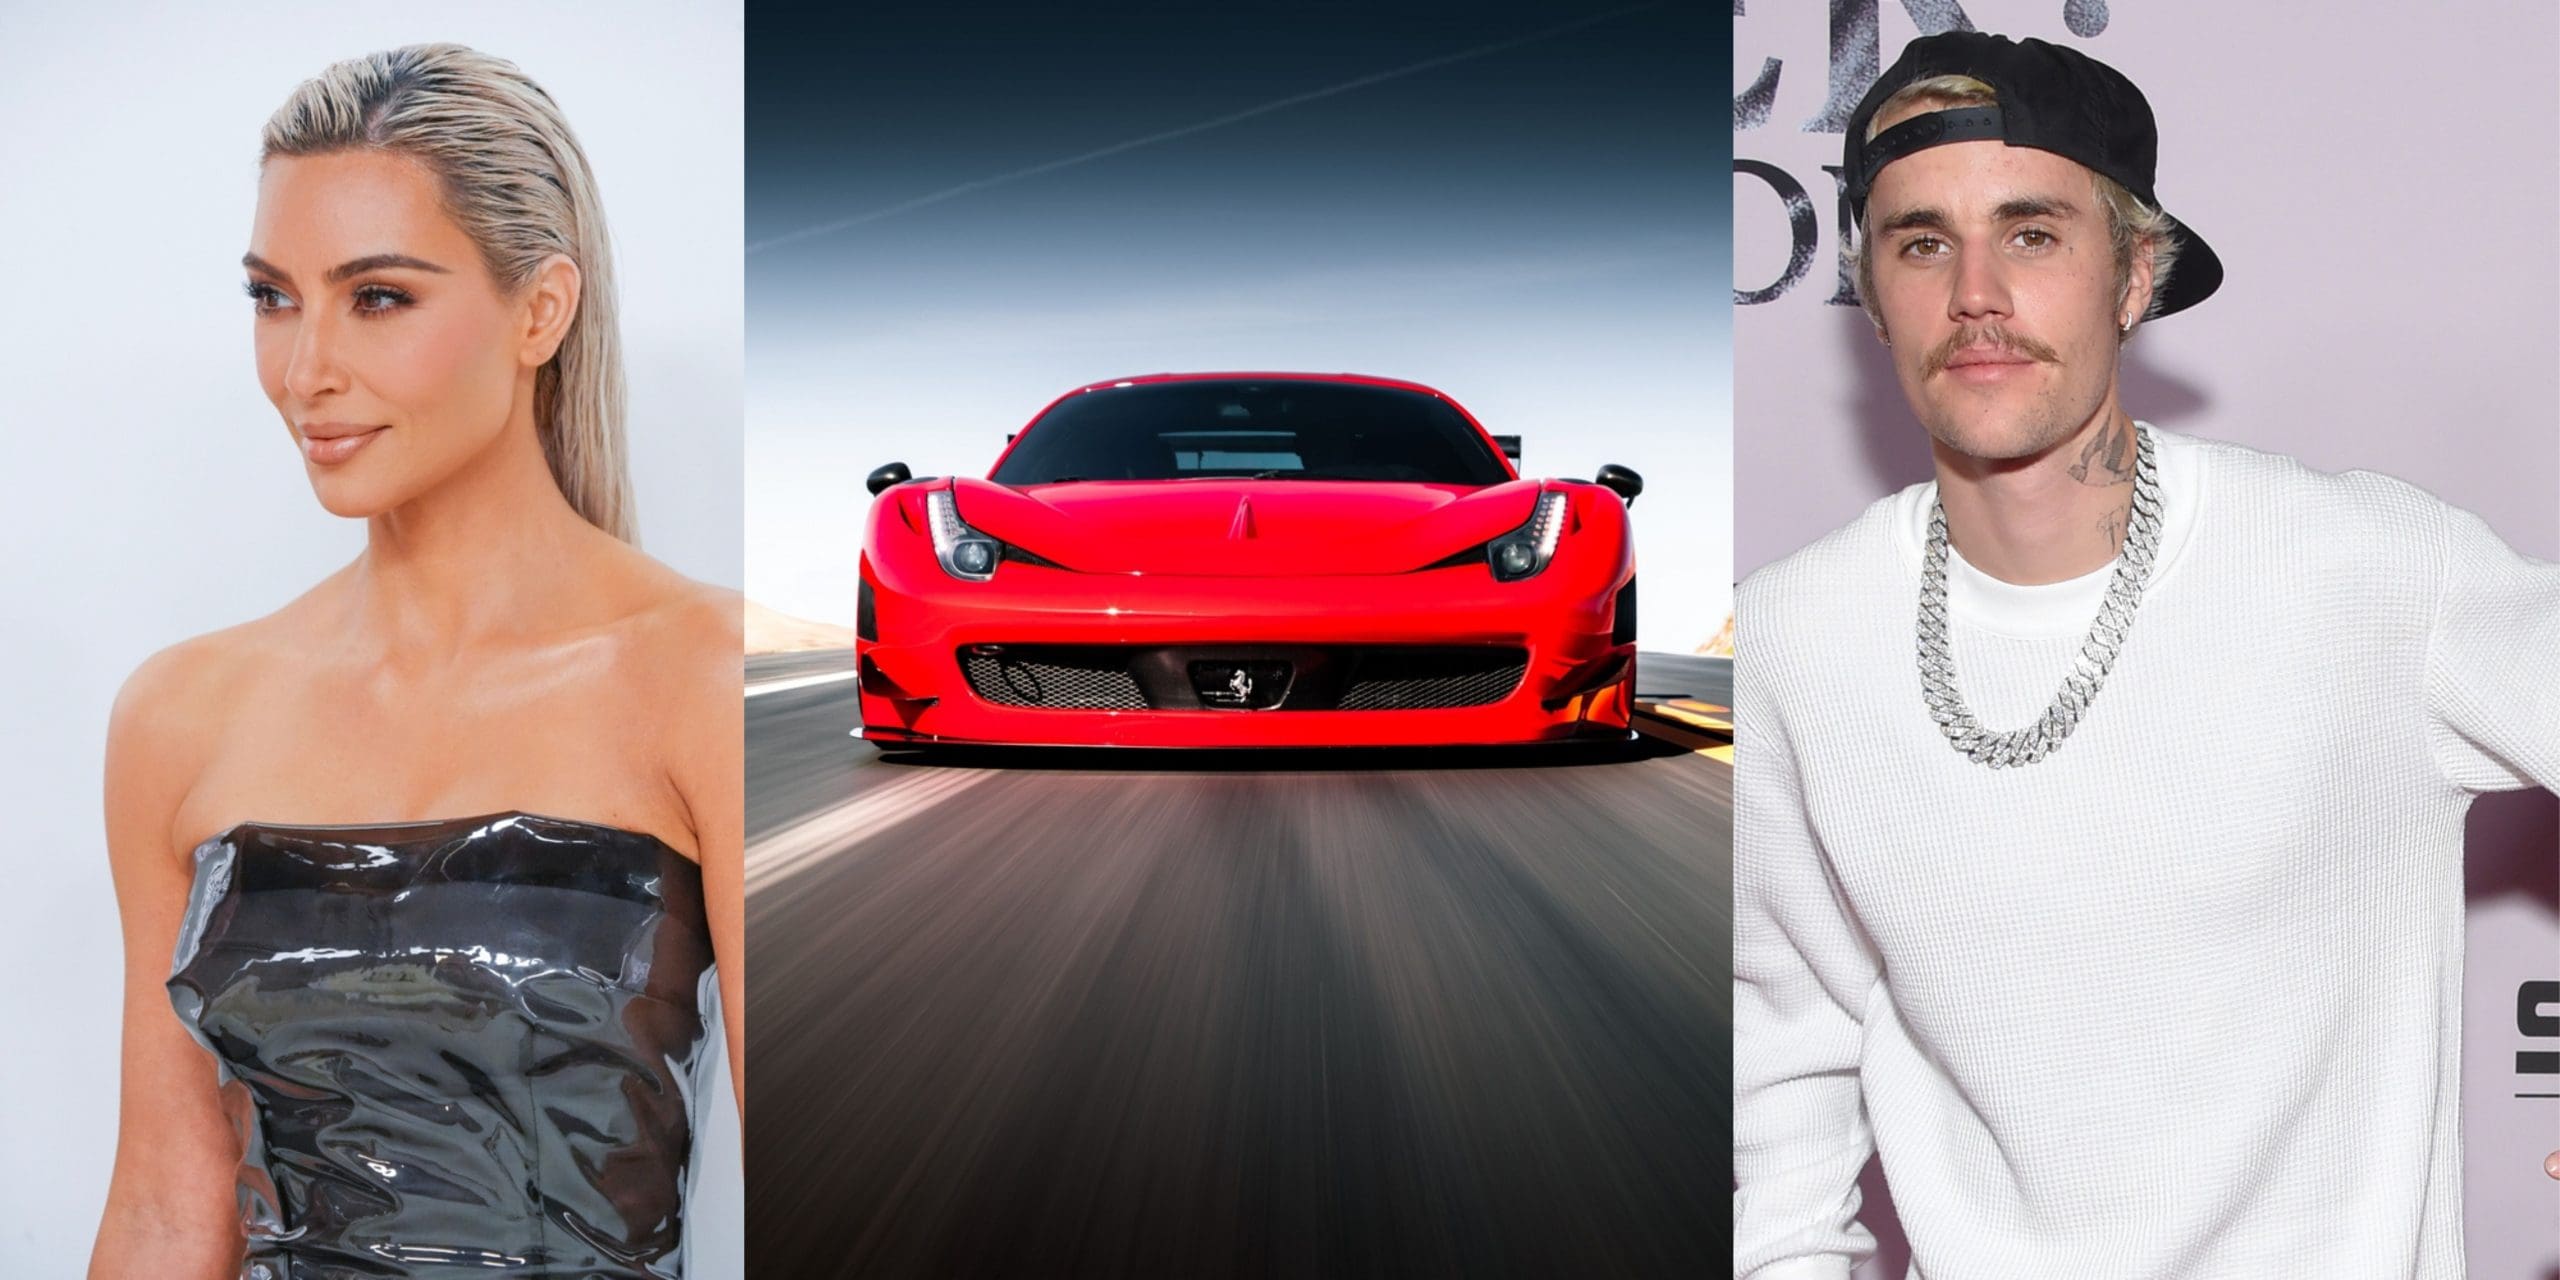 Kim Kardashian and Justin Bieber Are Permanently Banned From Buying A Ferrari